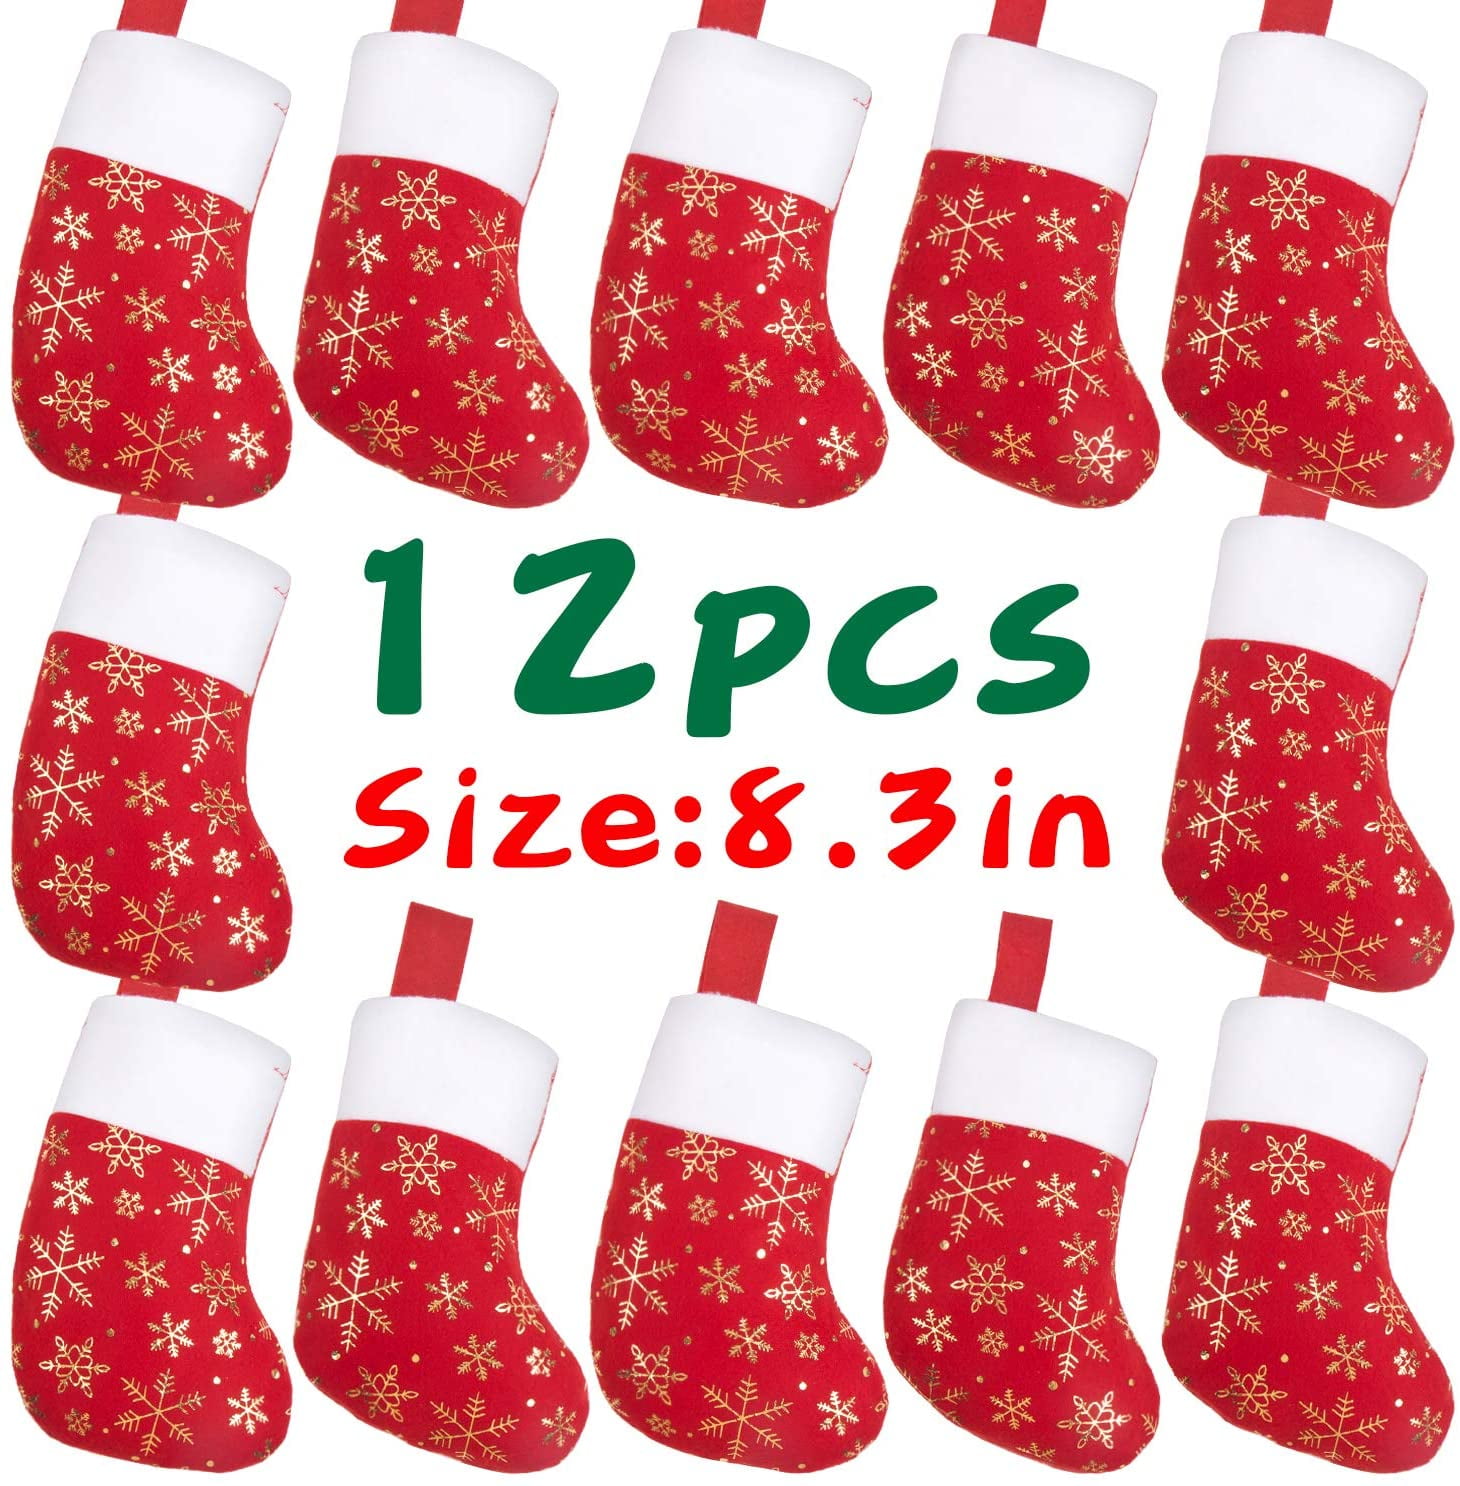 Christmas Stocking Set 12Pcs Small Size Christmas Stockings Bulk Xmas Stocking Decorations Snowflake Tableware Holders for Kids Candy Goodie Pouch Bags Gifts Holding Set Christmas Tree Party Ornament 